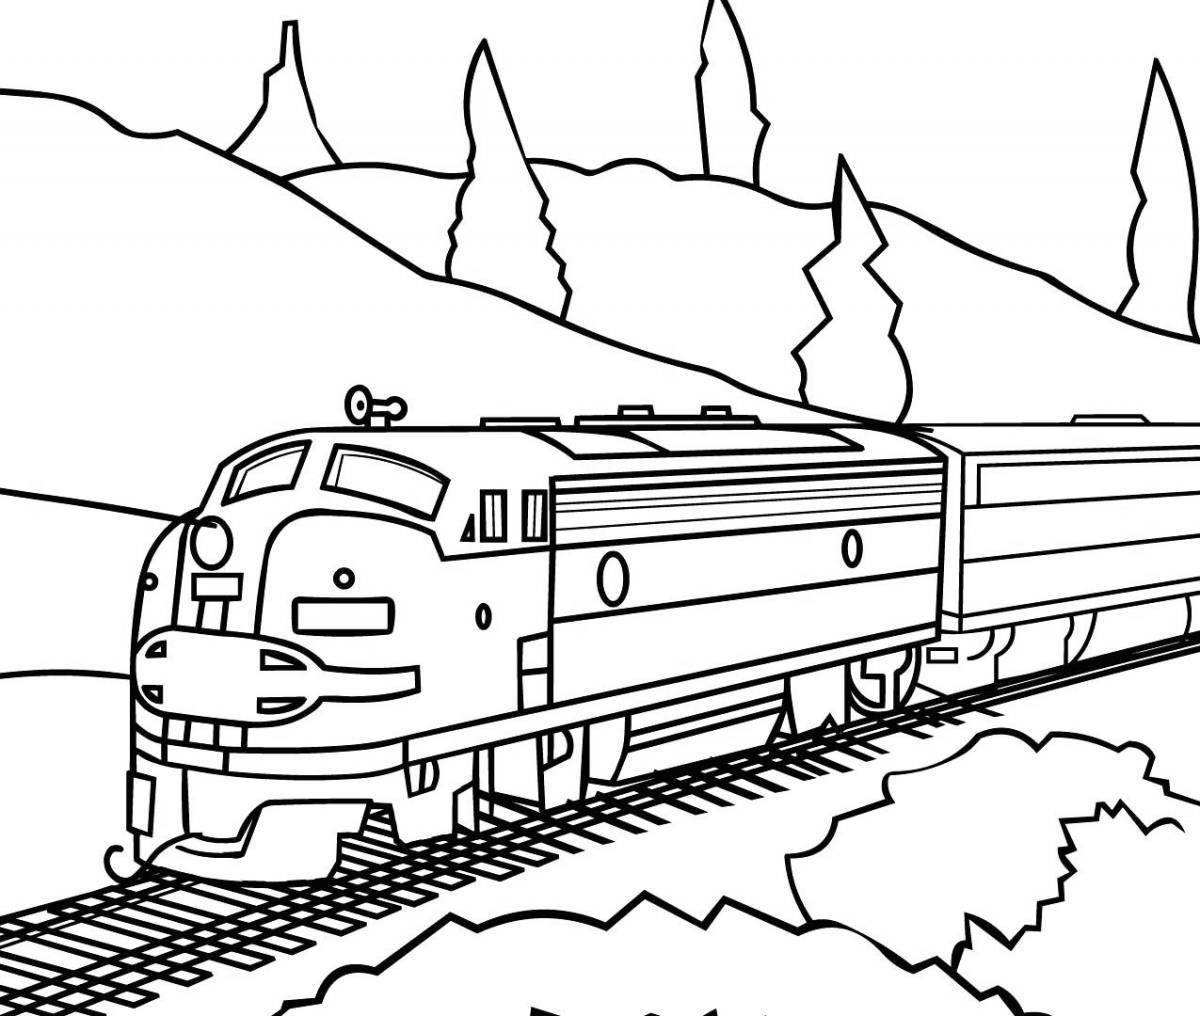 Cute locomotive coloring book for kids